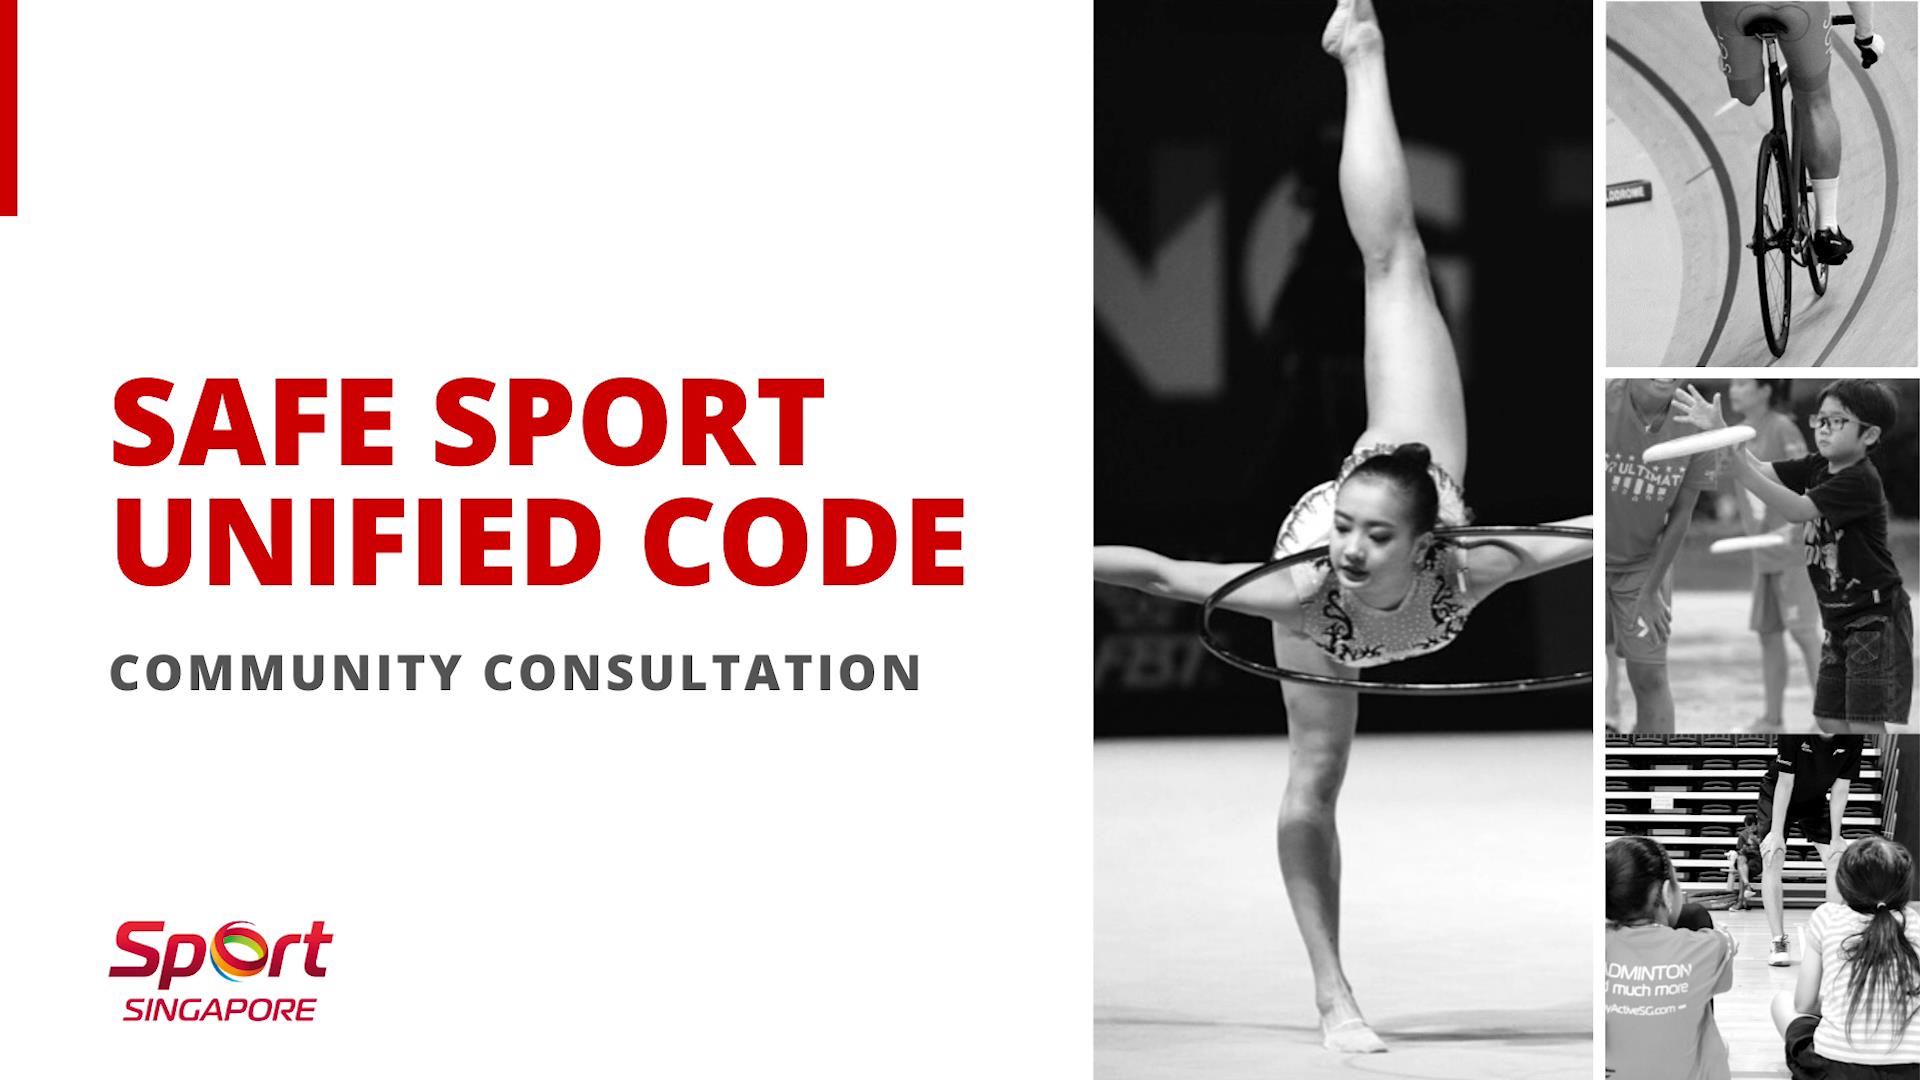 Consultations for the Safe Sport Unified Code